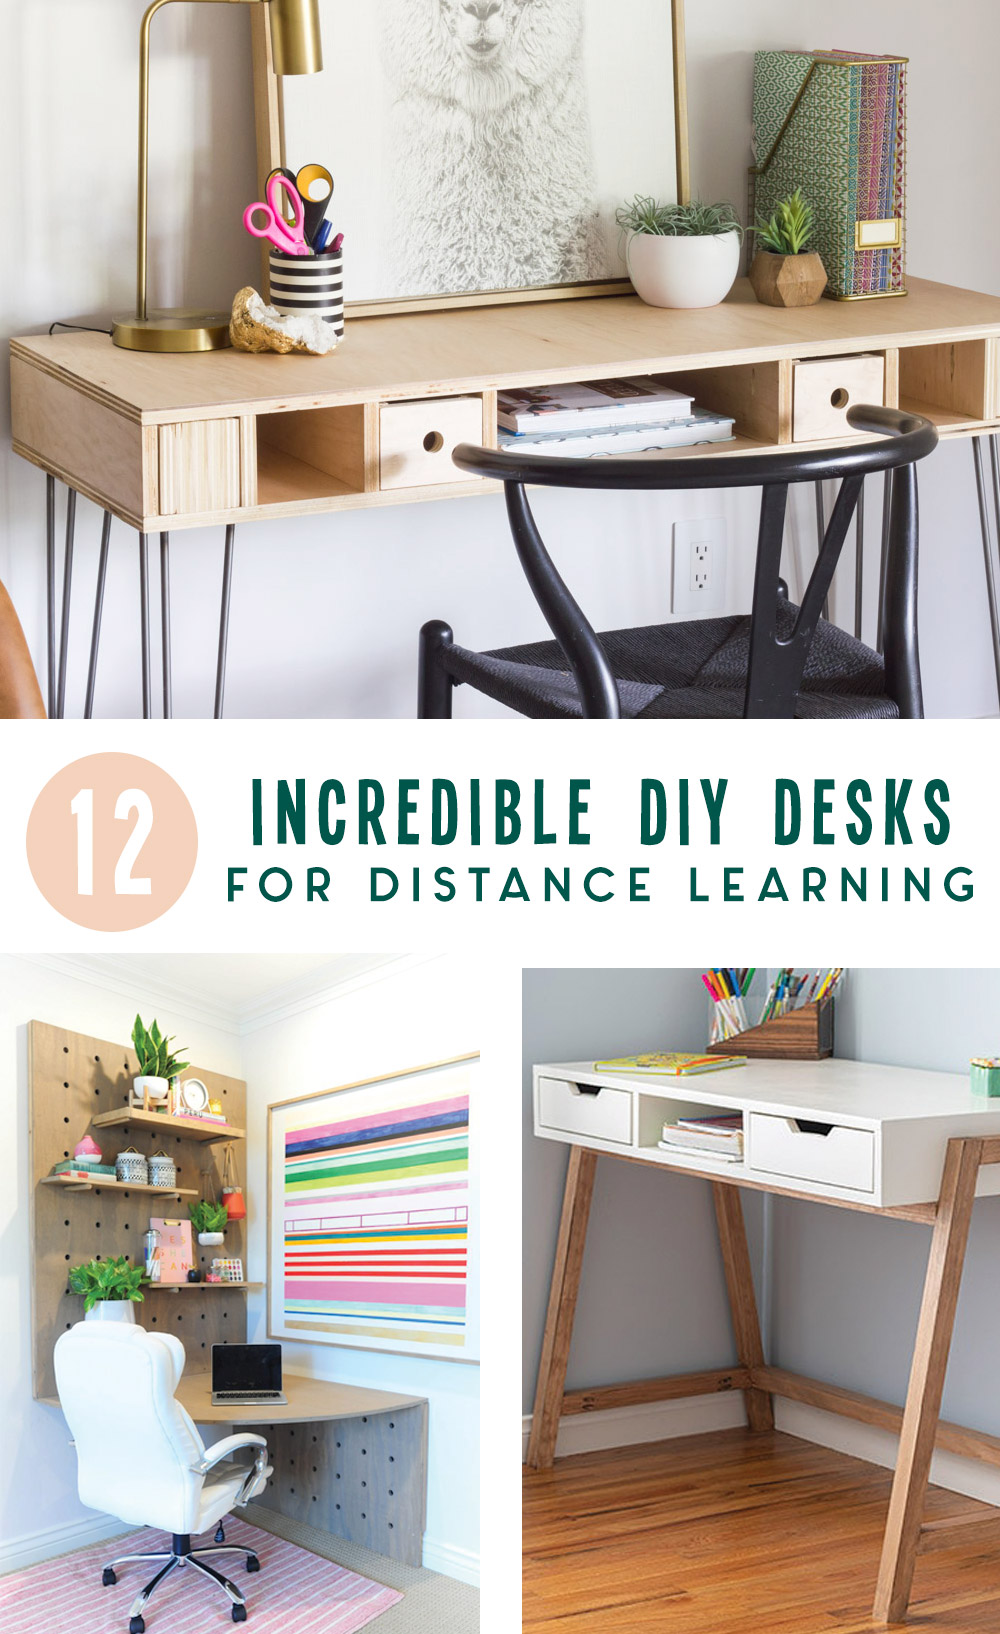 Pinable image featuring 3 desks and the heading "12 Incredible DIY Desks For Distance Learning"